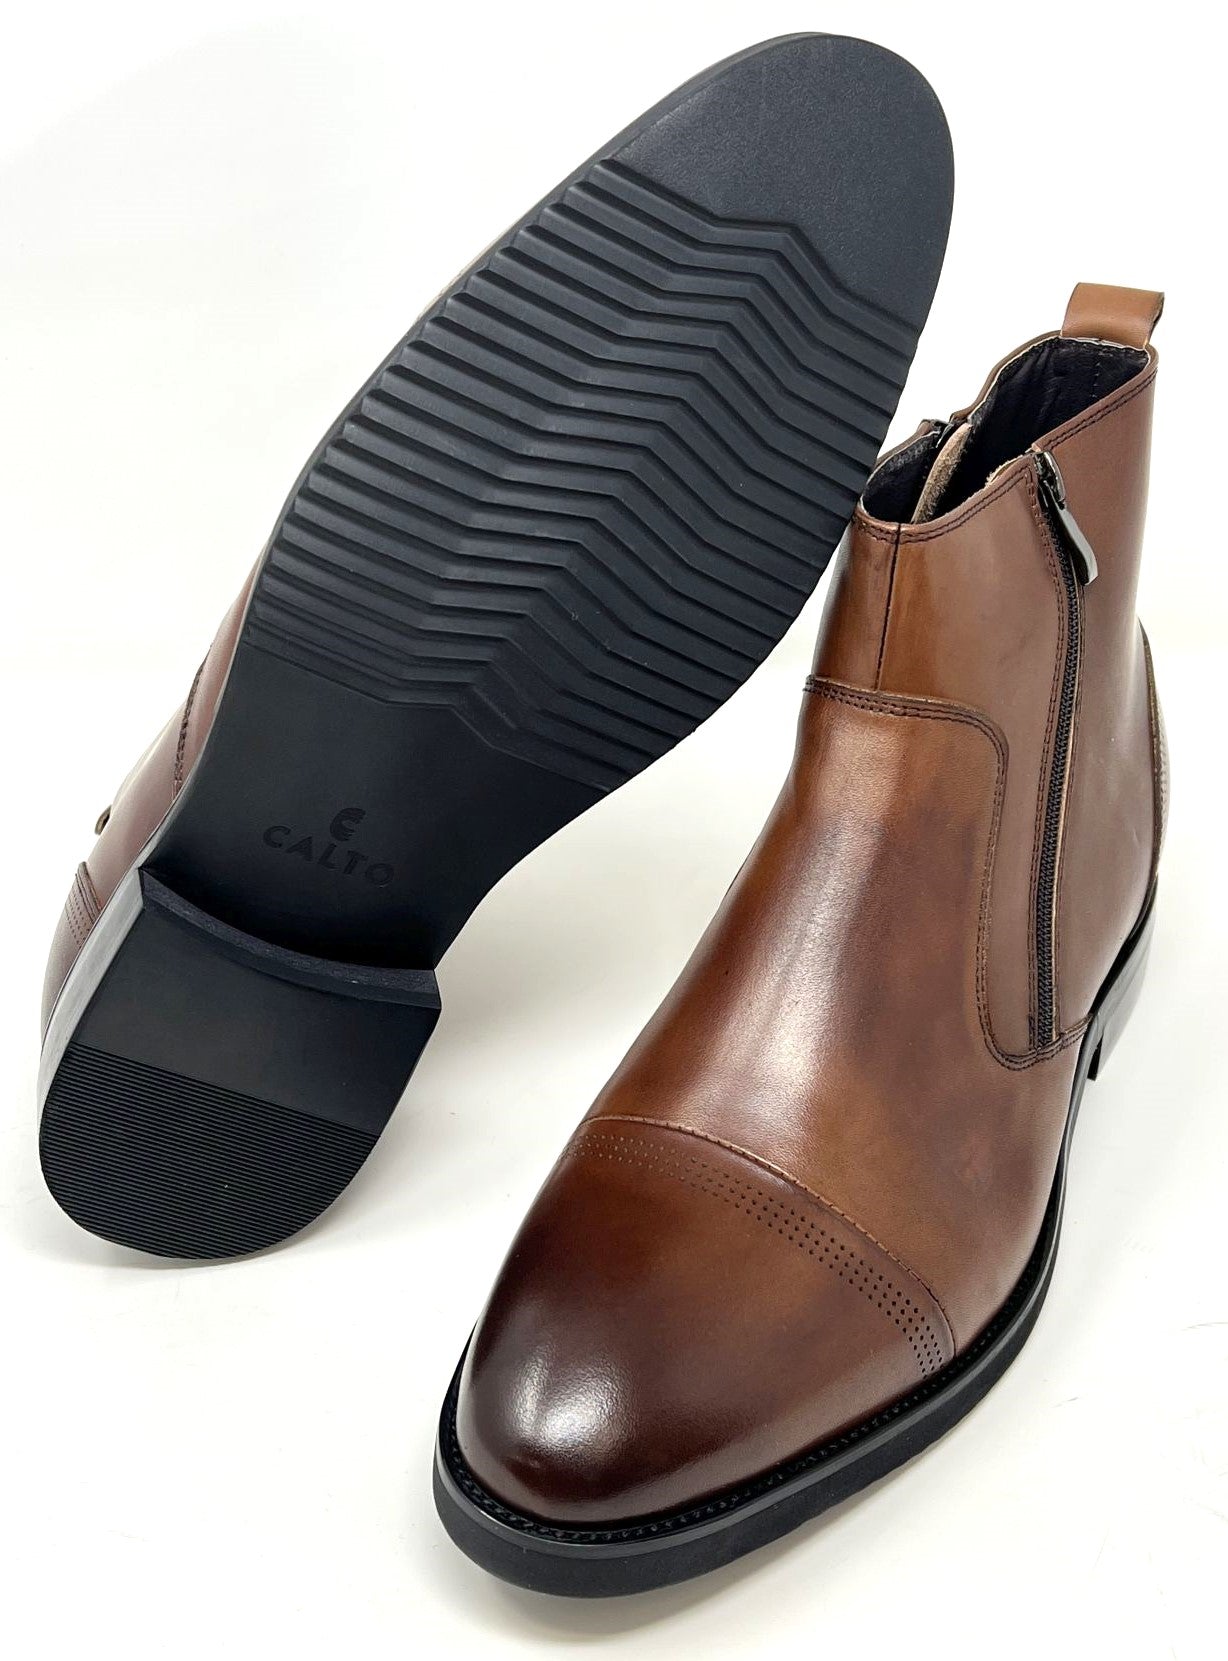 FSK0119 - 2.8 Inches Taller (Brown) - Size 11 Only